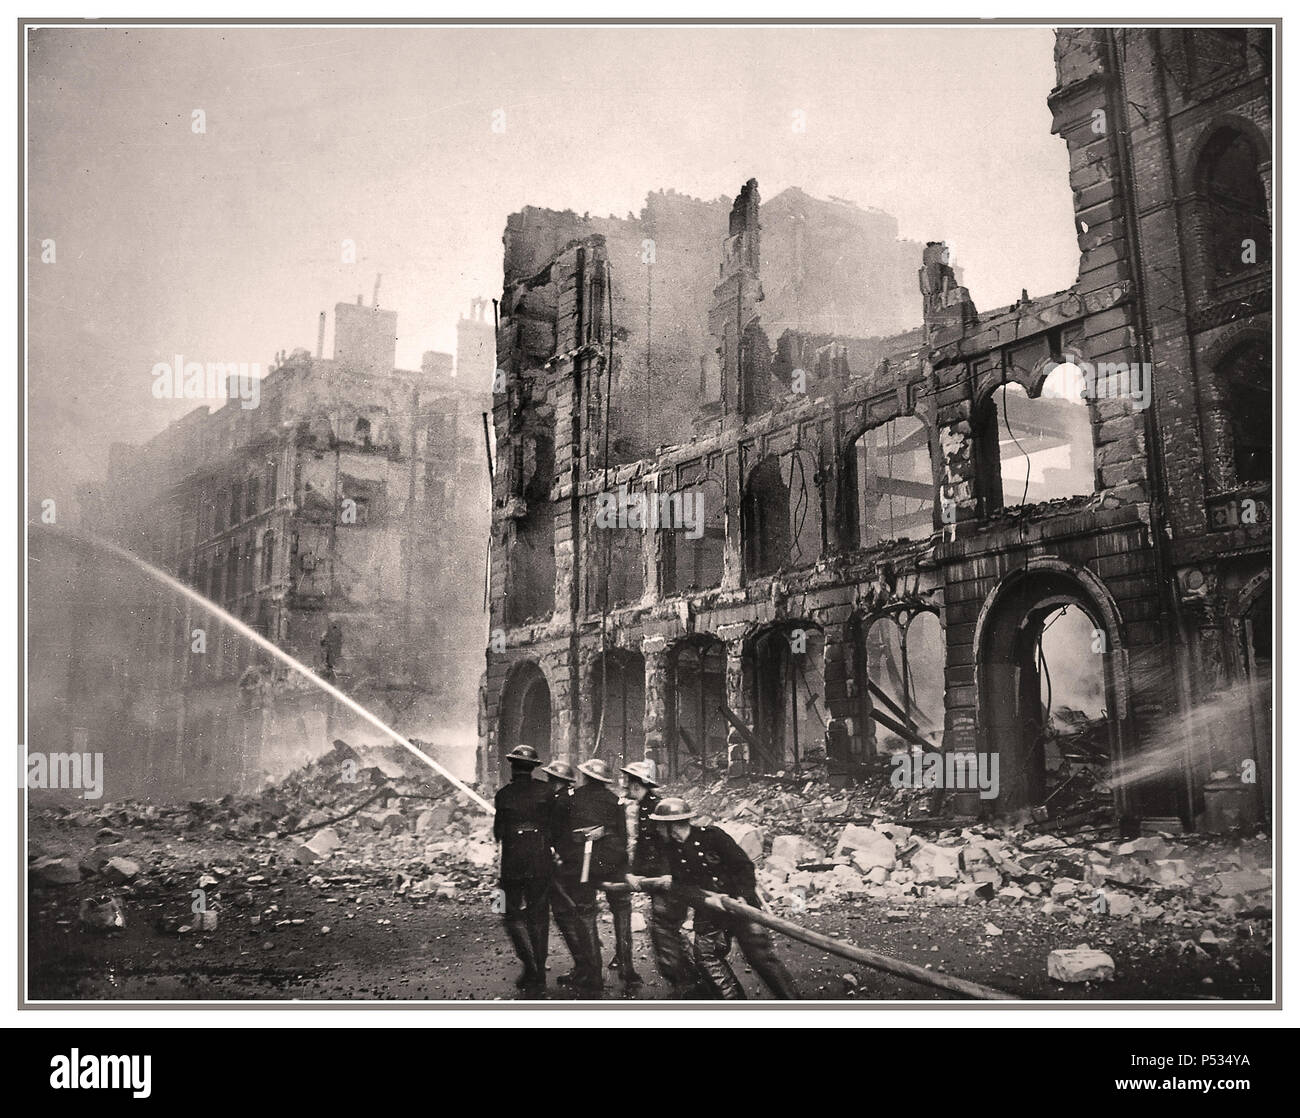 1940 London WW2 Blitz Bombing City Centre brave courageous British Fireman Firemen Firefighters with hose fighting fires and damping down after a Nazi Germany terror bombing raid. Central London City buildings in ruins with danger of imminent collapse London UK Stock Photo